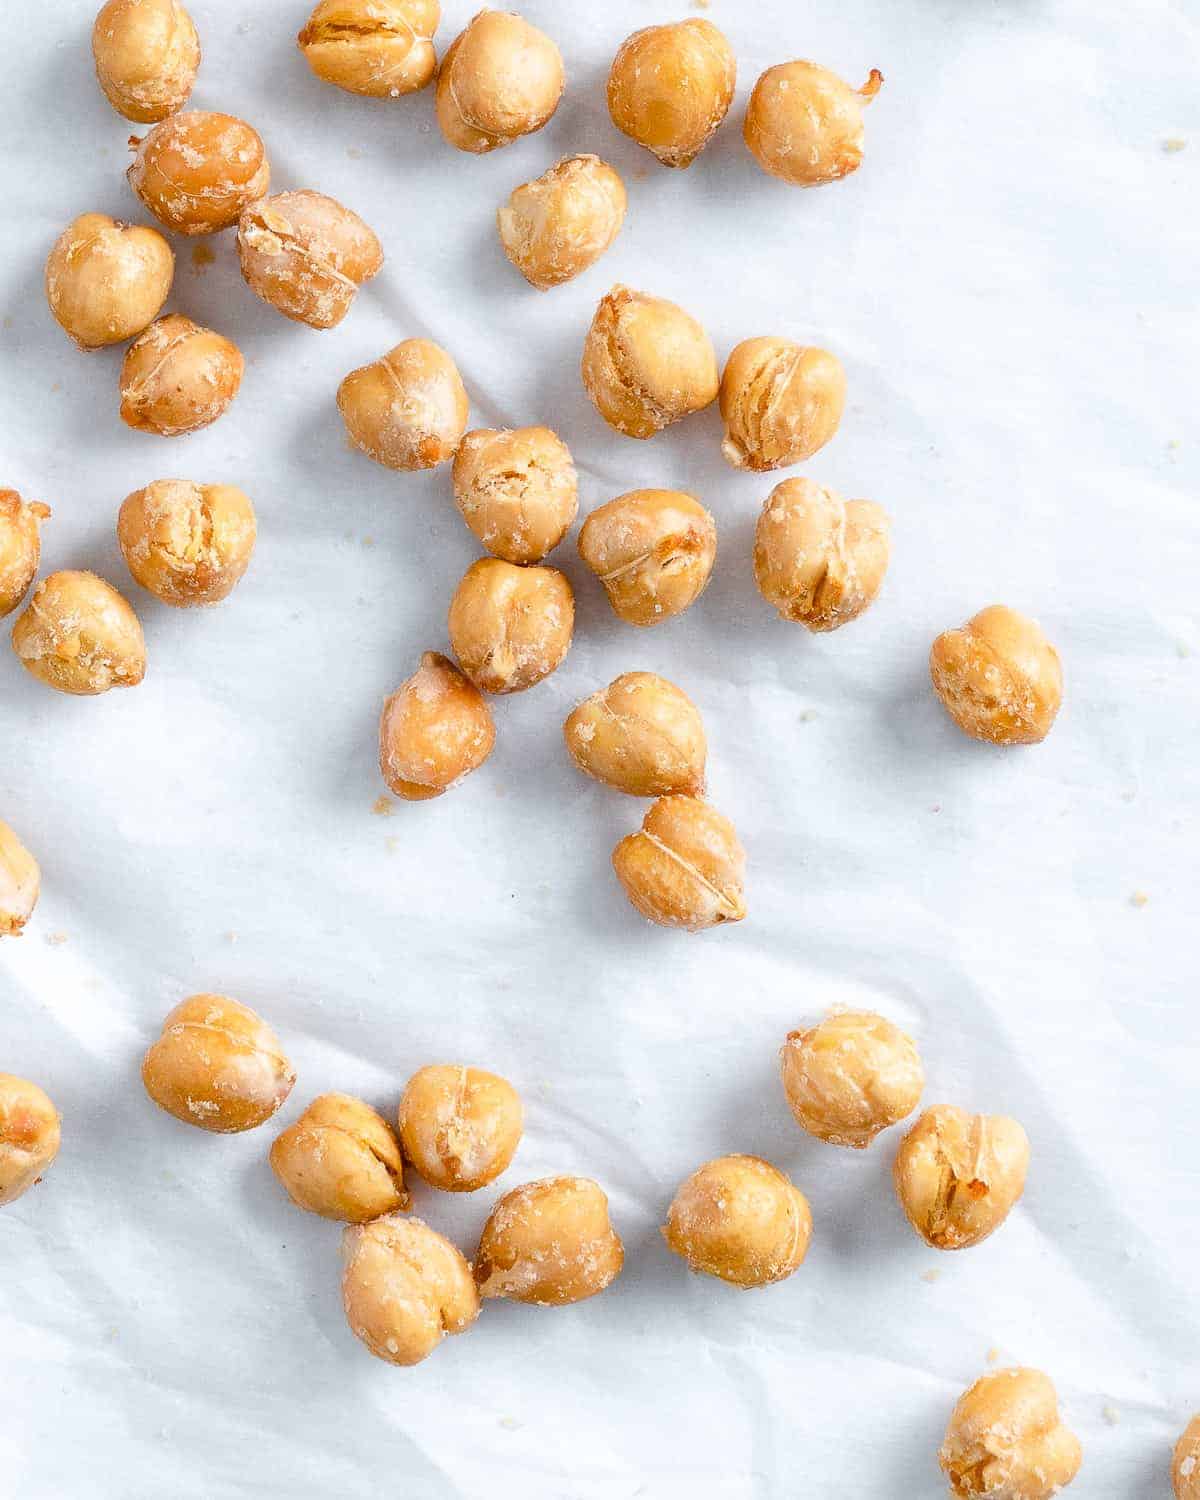 scattered completed air fryer chickpeas on a white surface